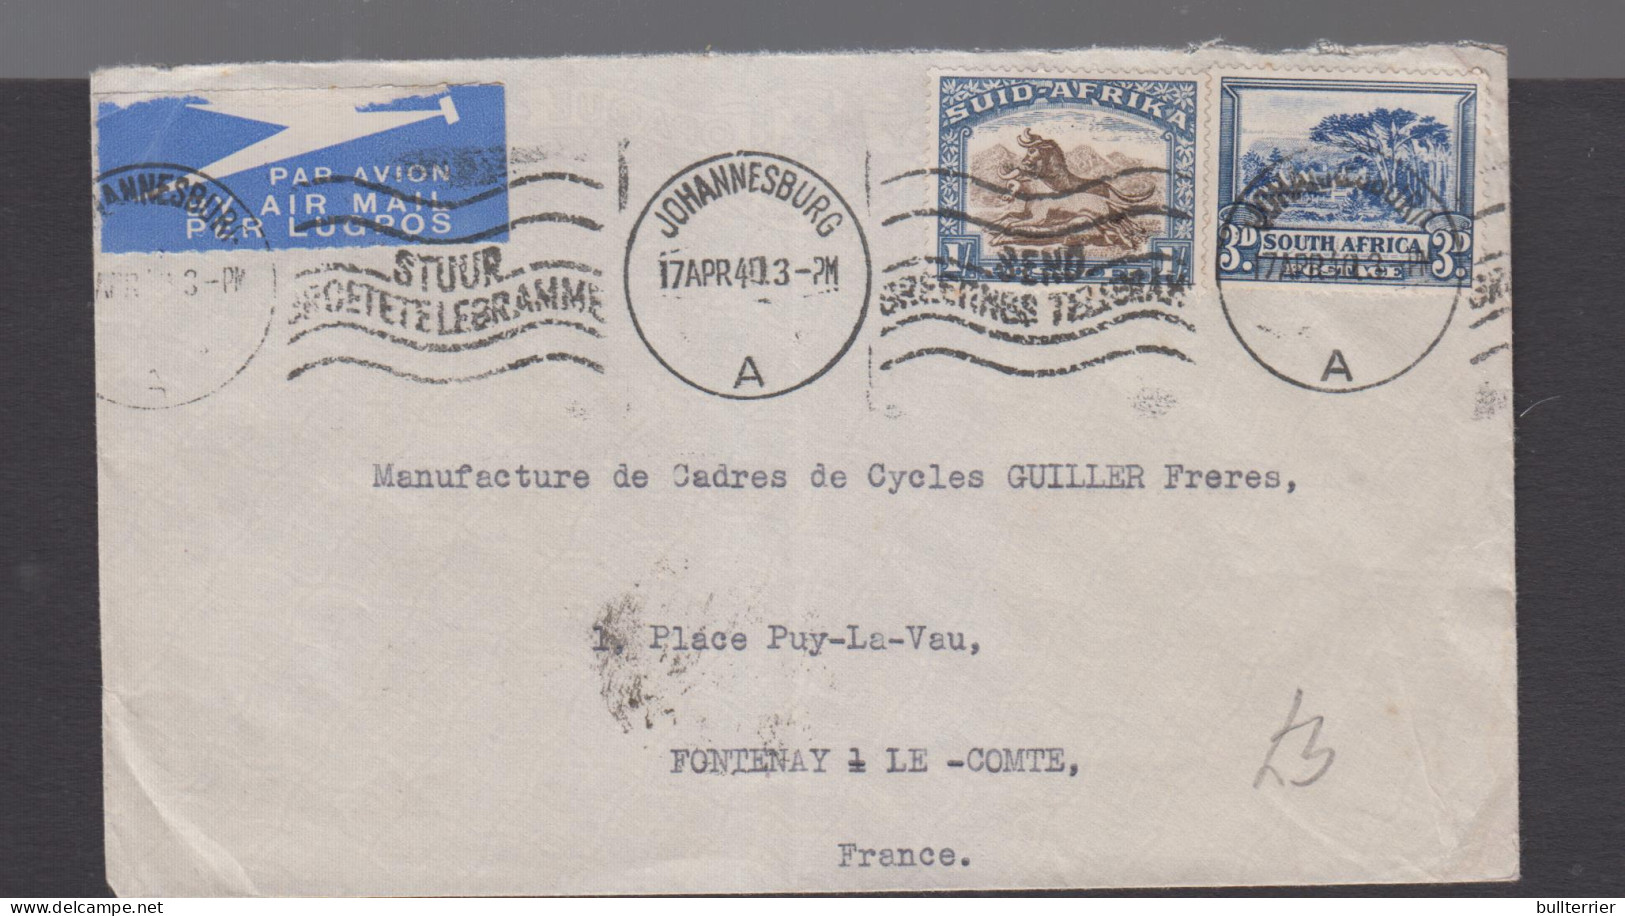 AIRMAILS - SOUTH AFRICA - 1940 - AIRMAIL COVER JO BURG TO FONTENAY LE COMTE  - Airmail